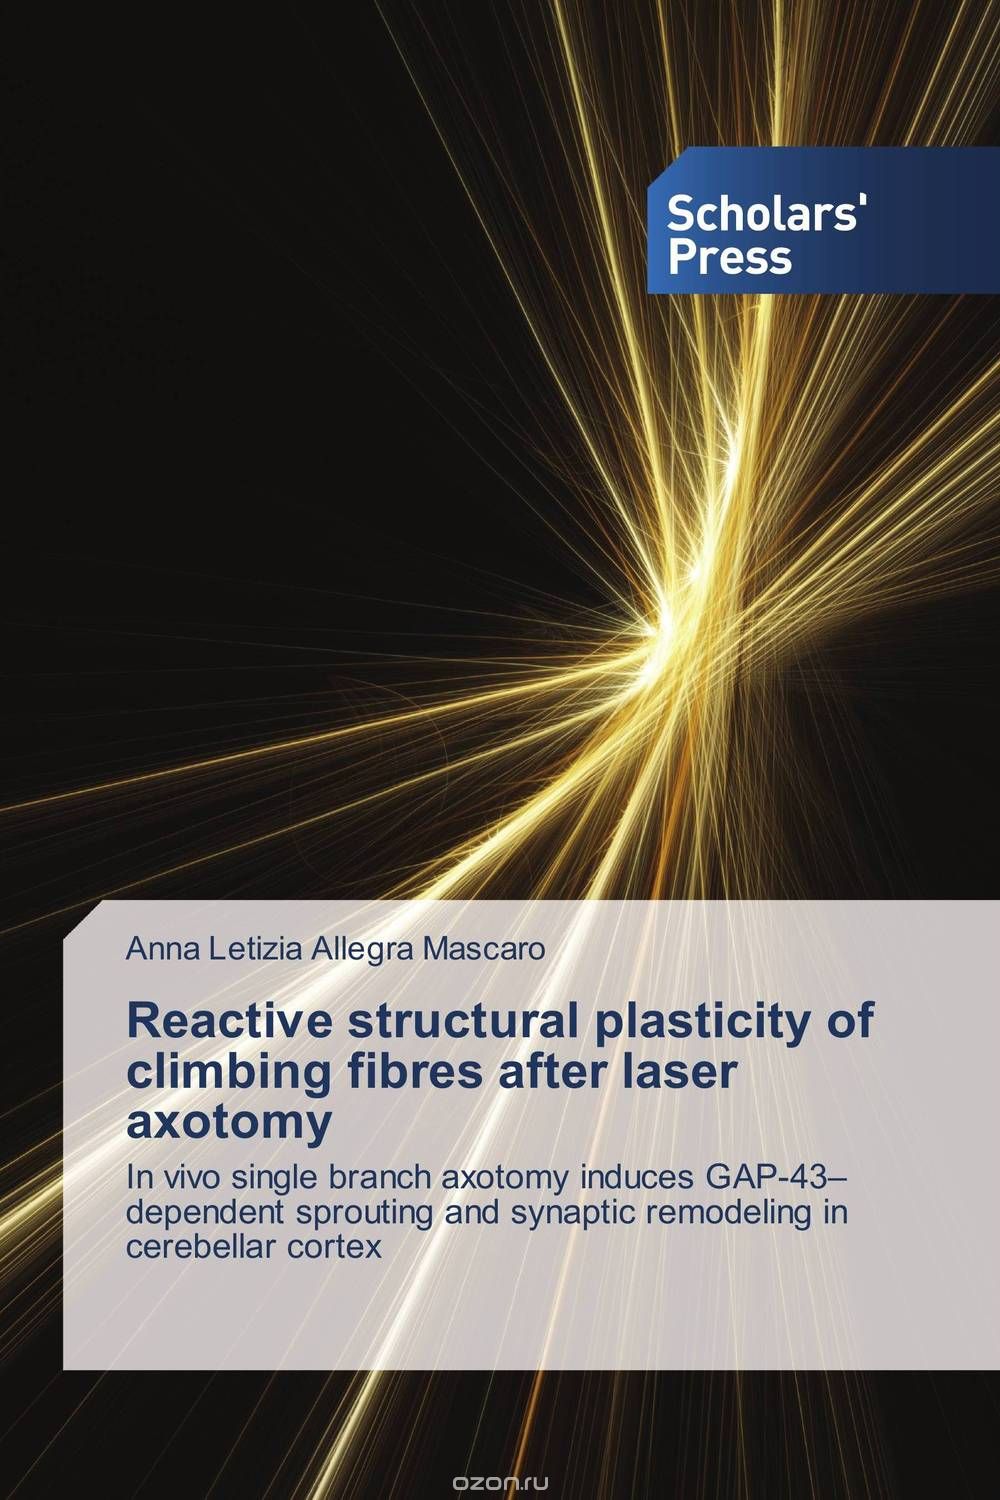 Reactive structural plasticity of climbing fibres after laser axotomy